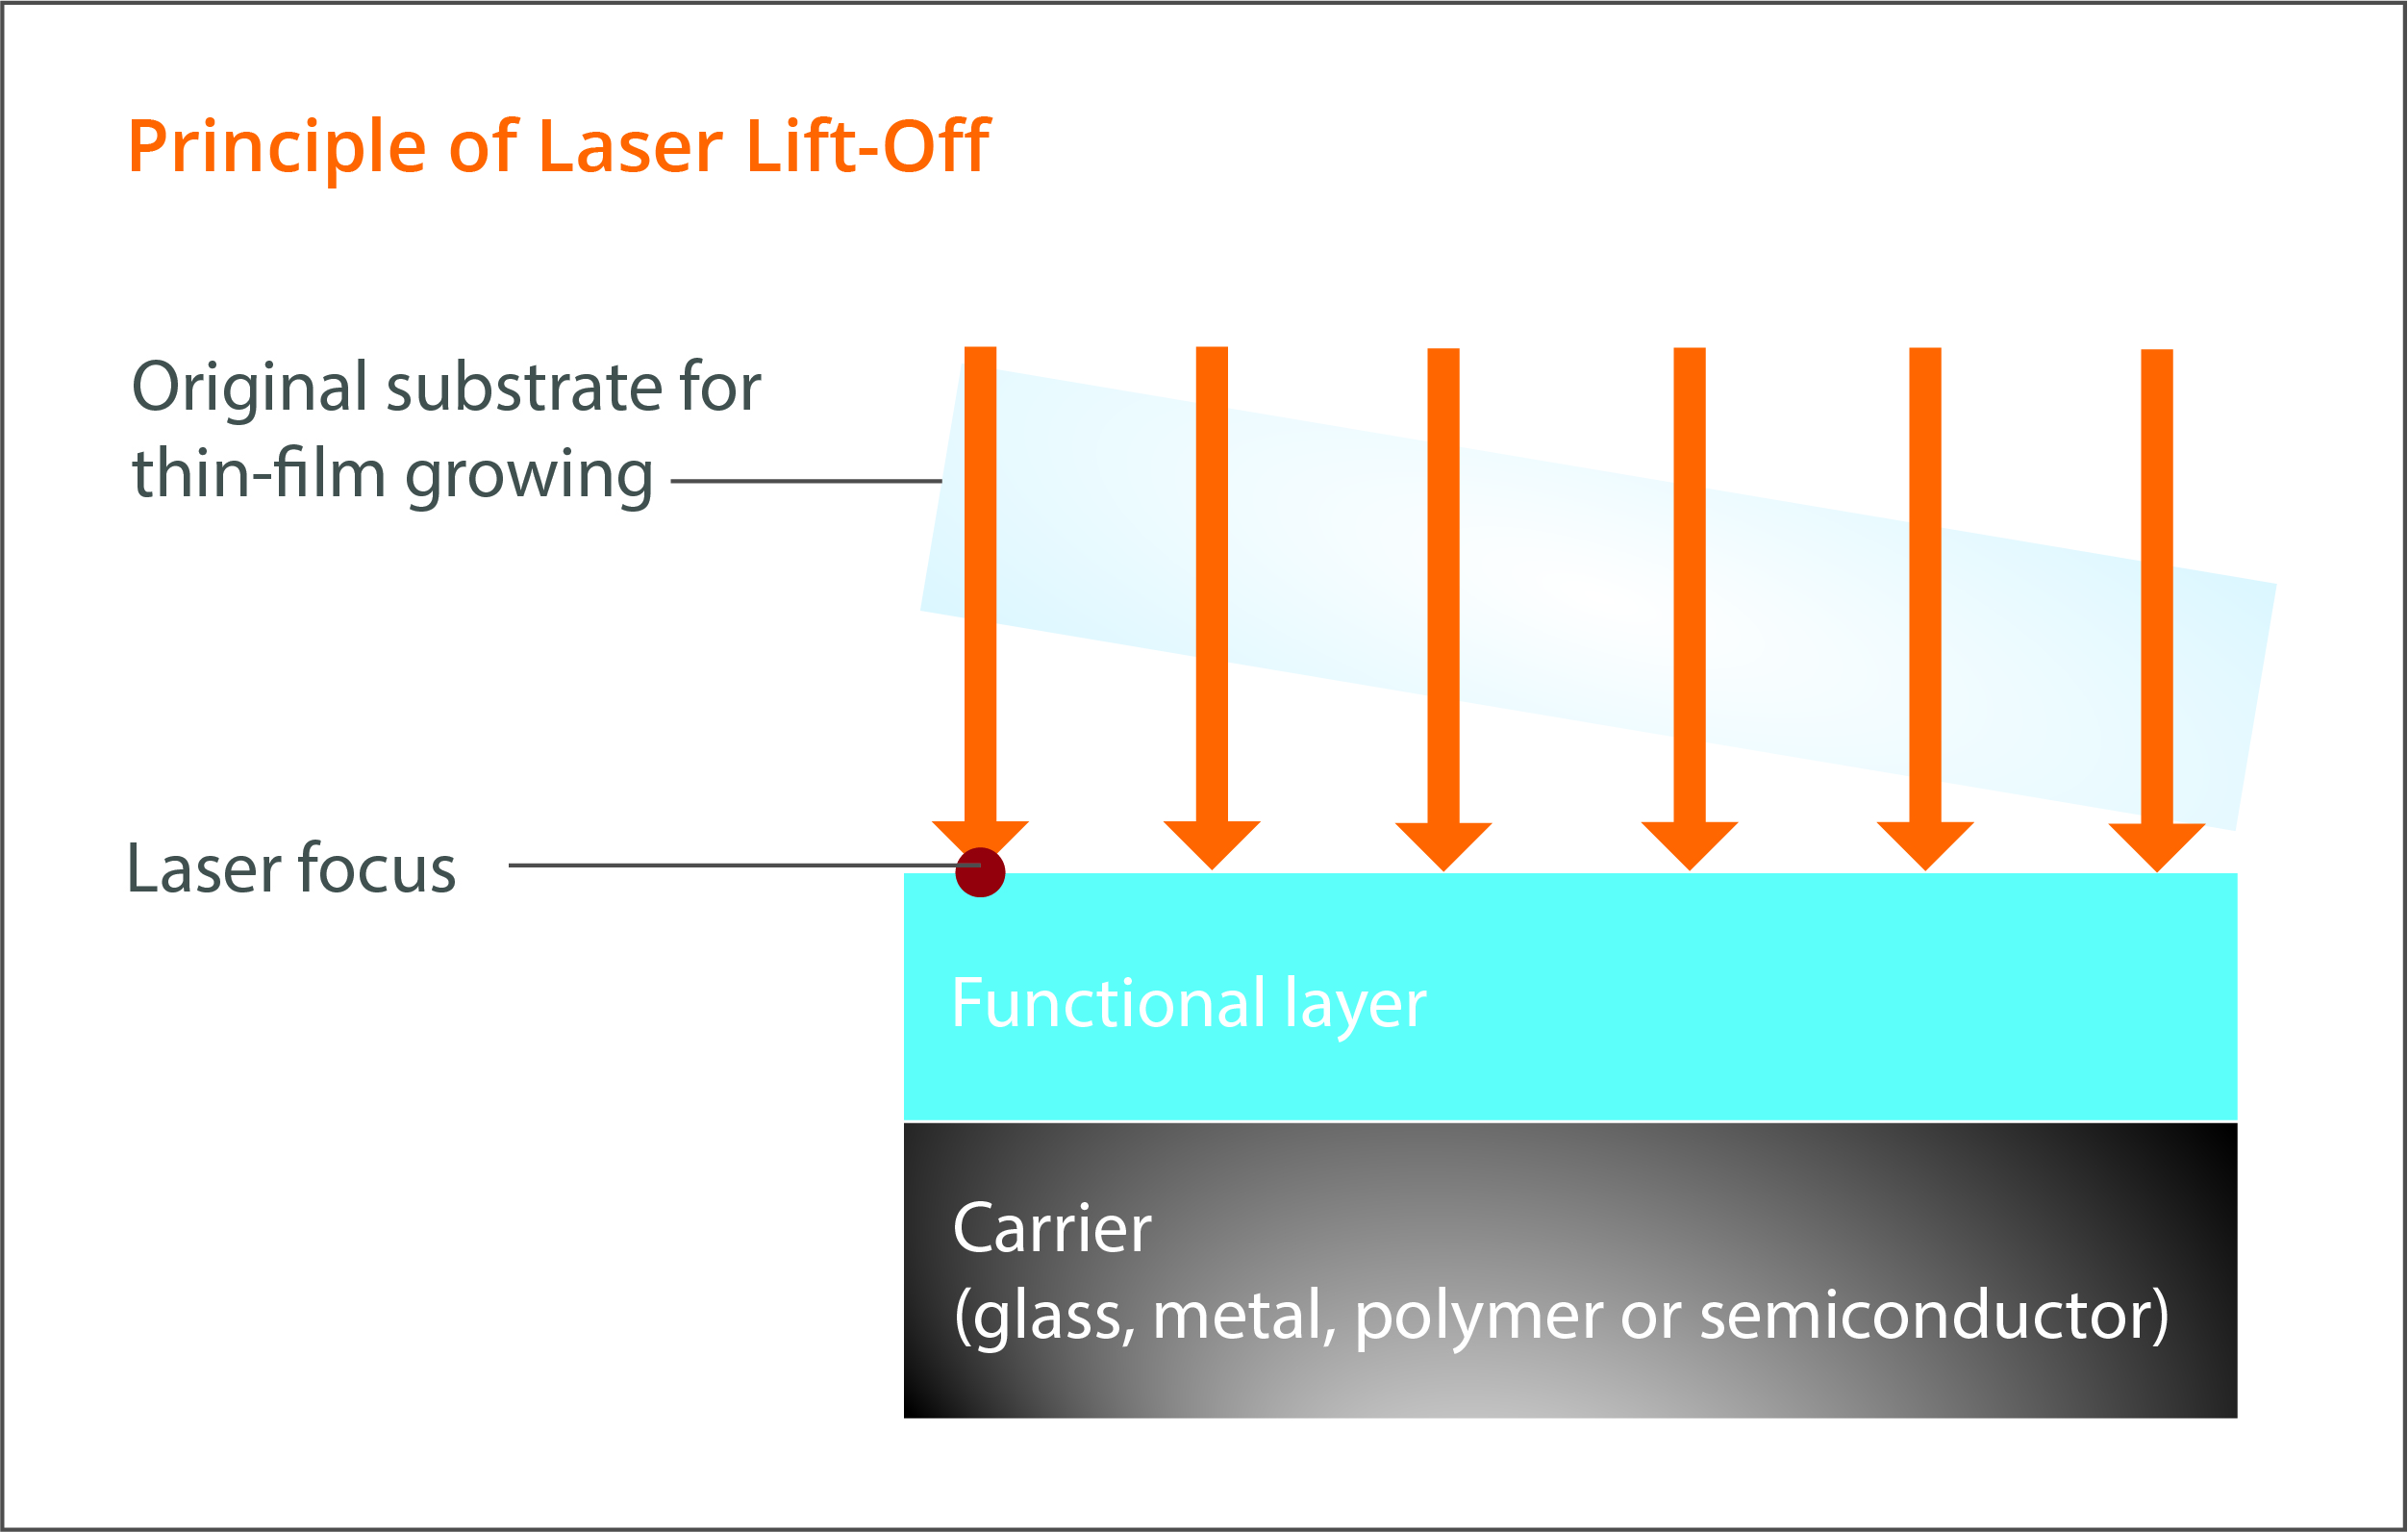 3D-Micromac’s Laser Lift-Off (LLO) process, available on both the company’s microCETI™ and microMIRA™ laser micromachining platforms, selectively detaches one material from another without causing damage to the carrier or base material.